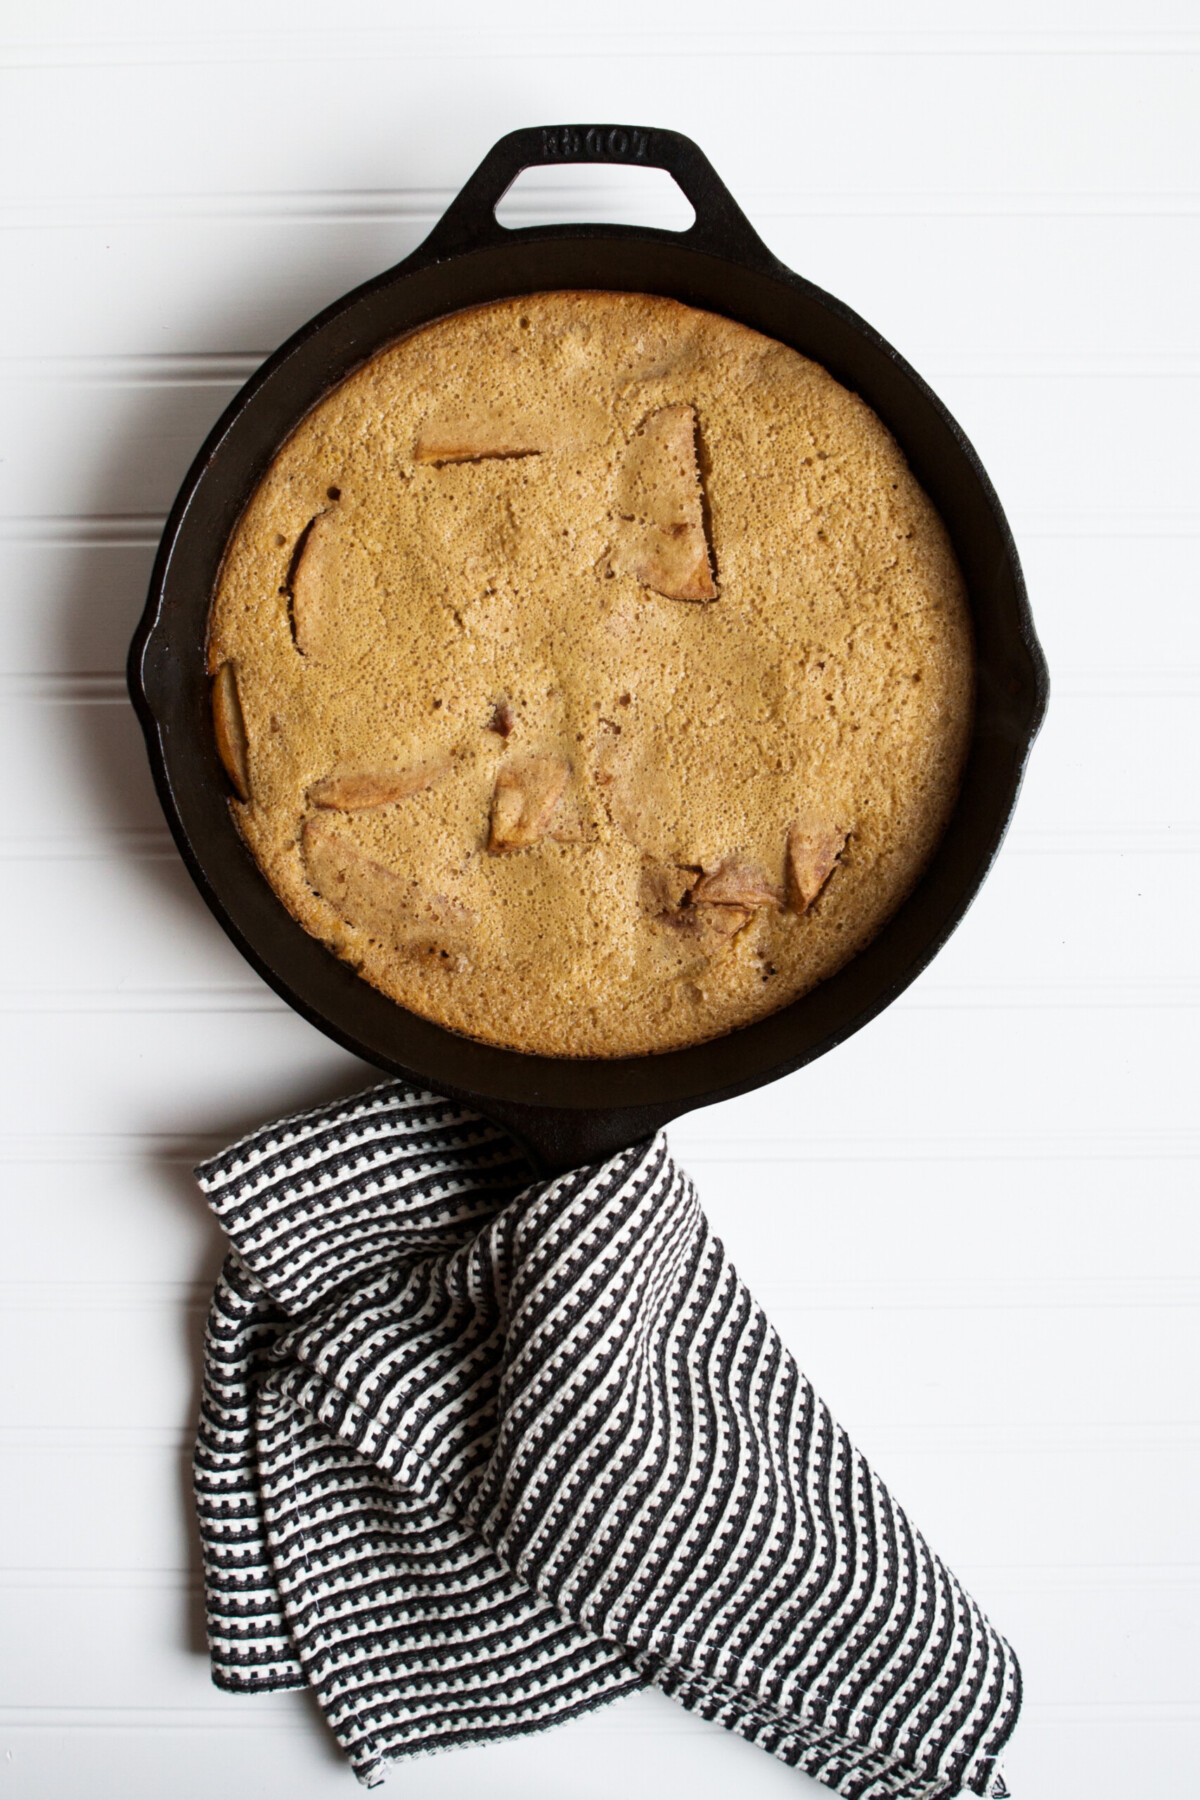 Photograph of puffed pancake in a cast iron skillet